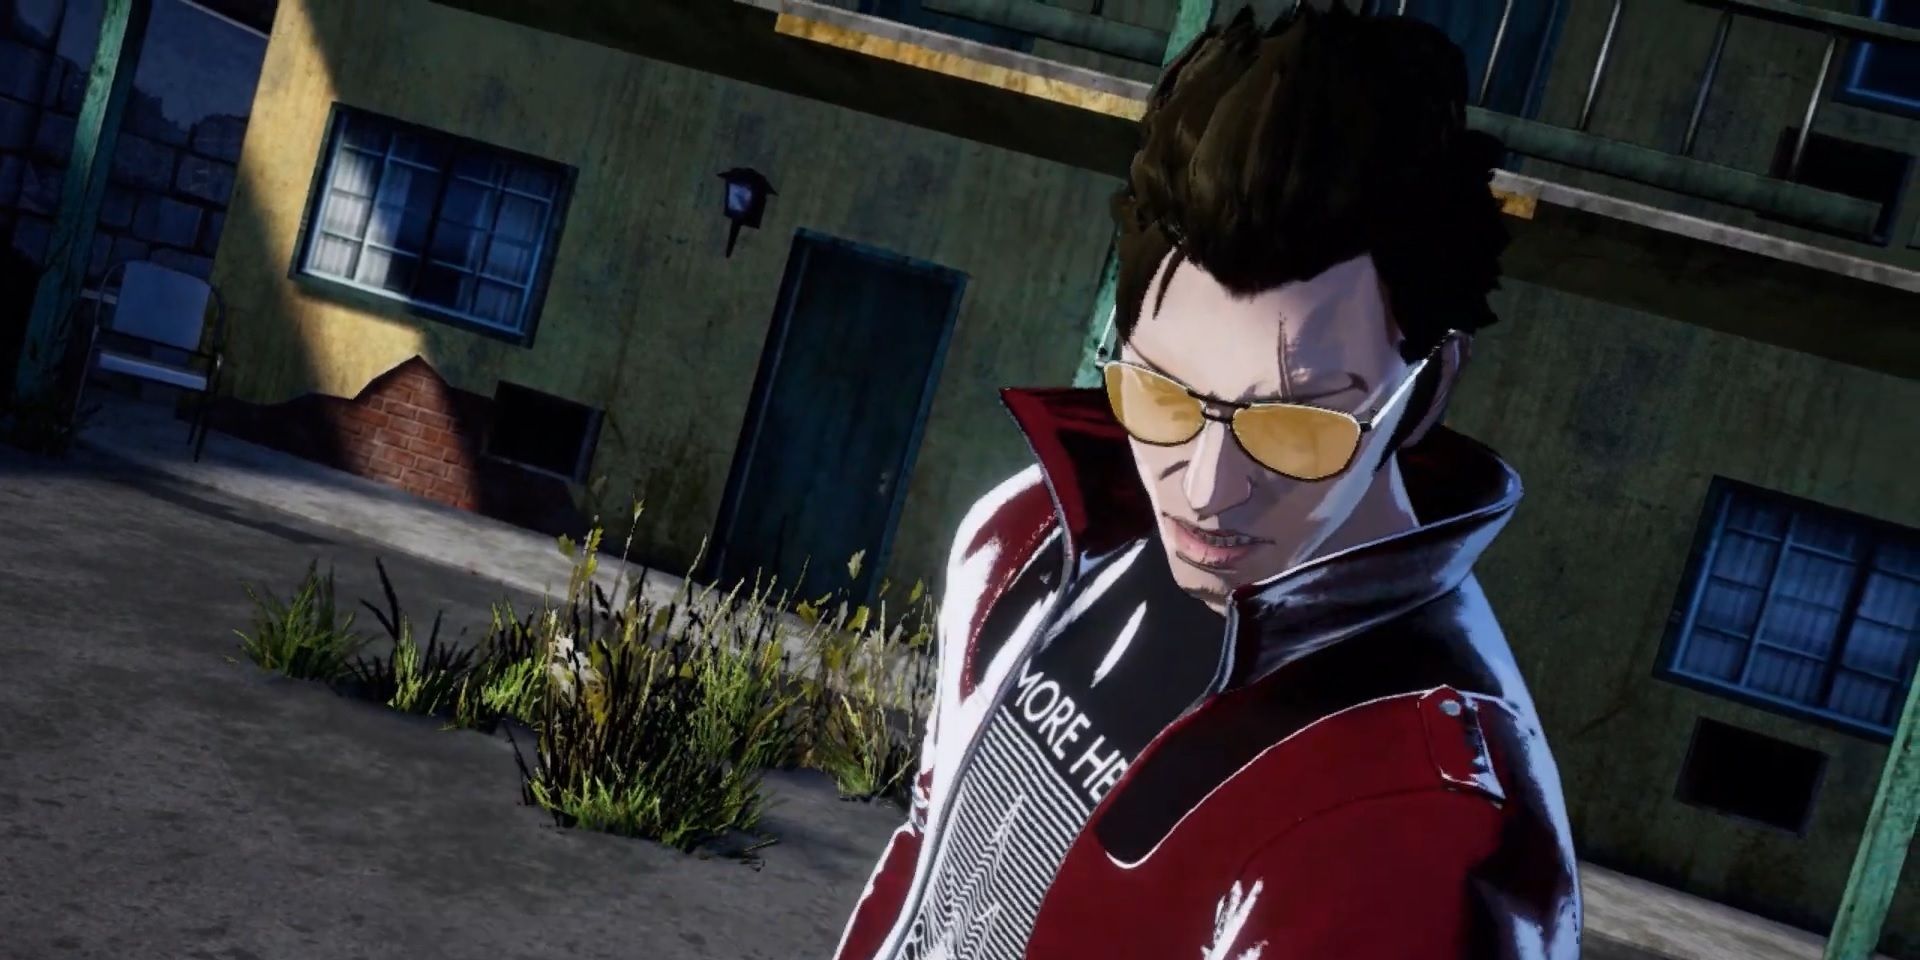 No More Heroes 1 & 2 PC Ports Inbound After ESRB Ratings Appear